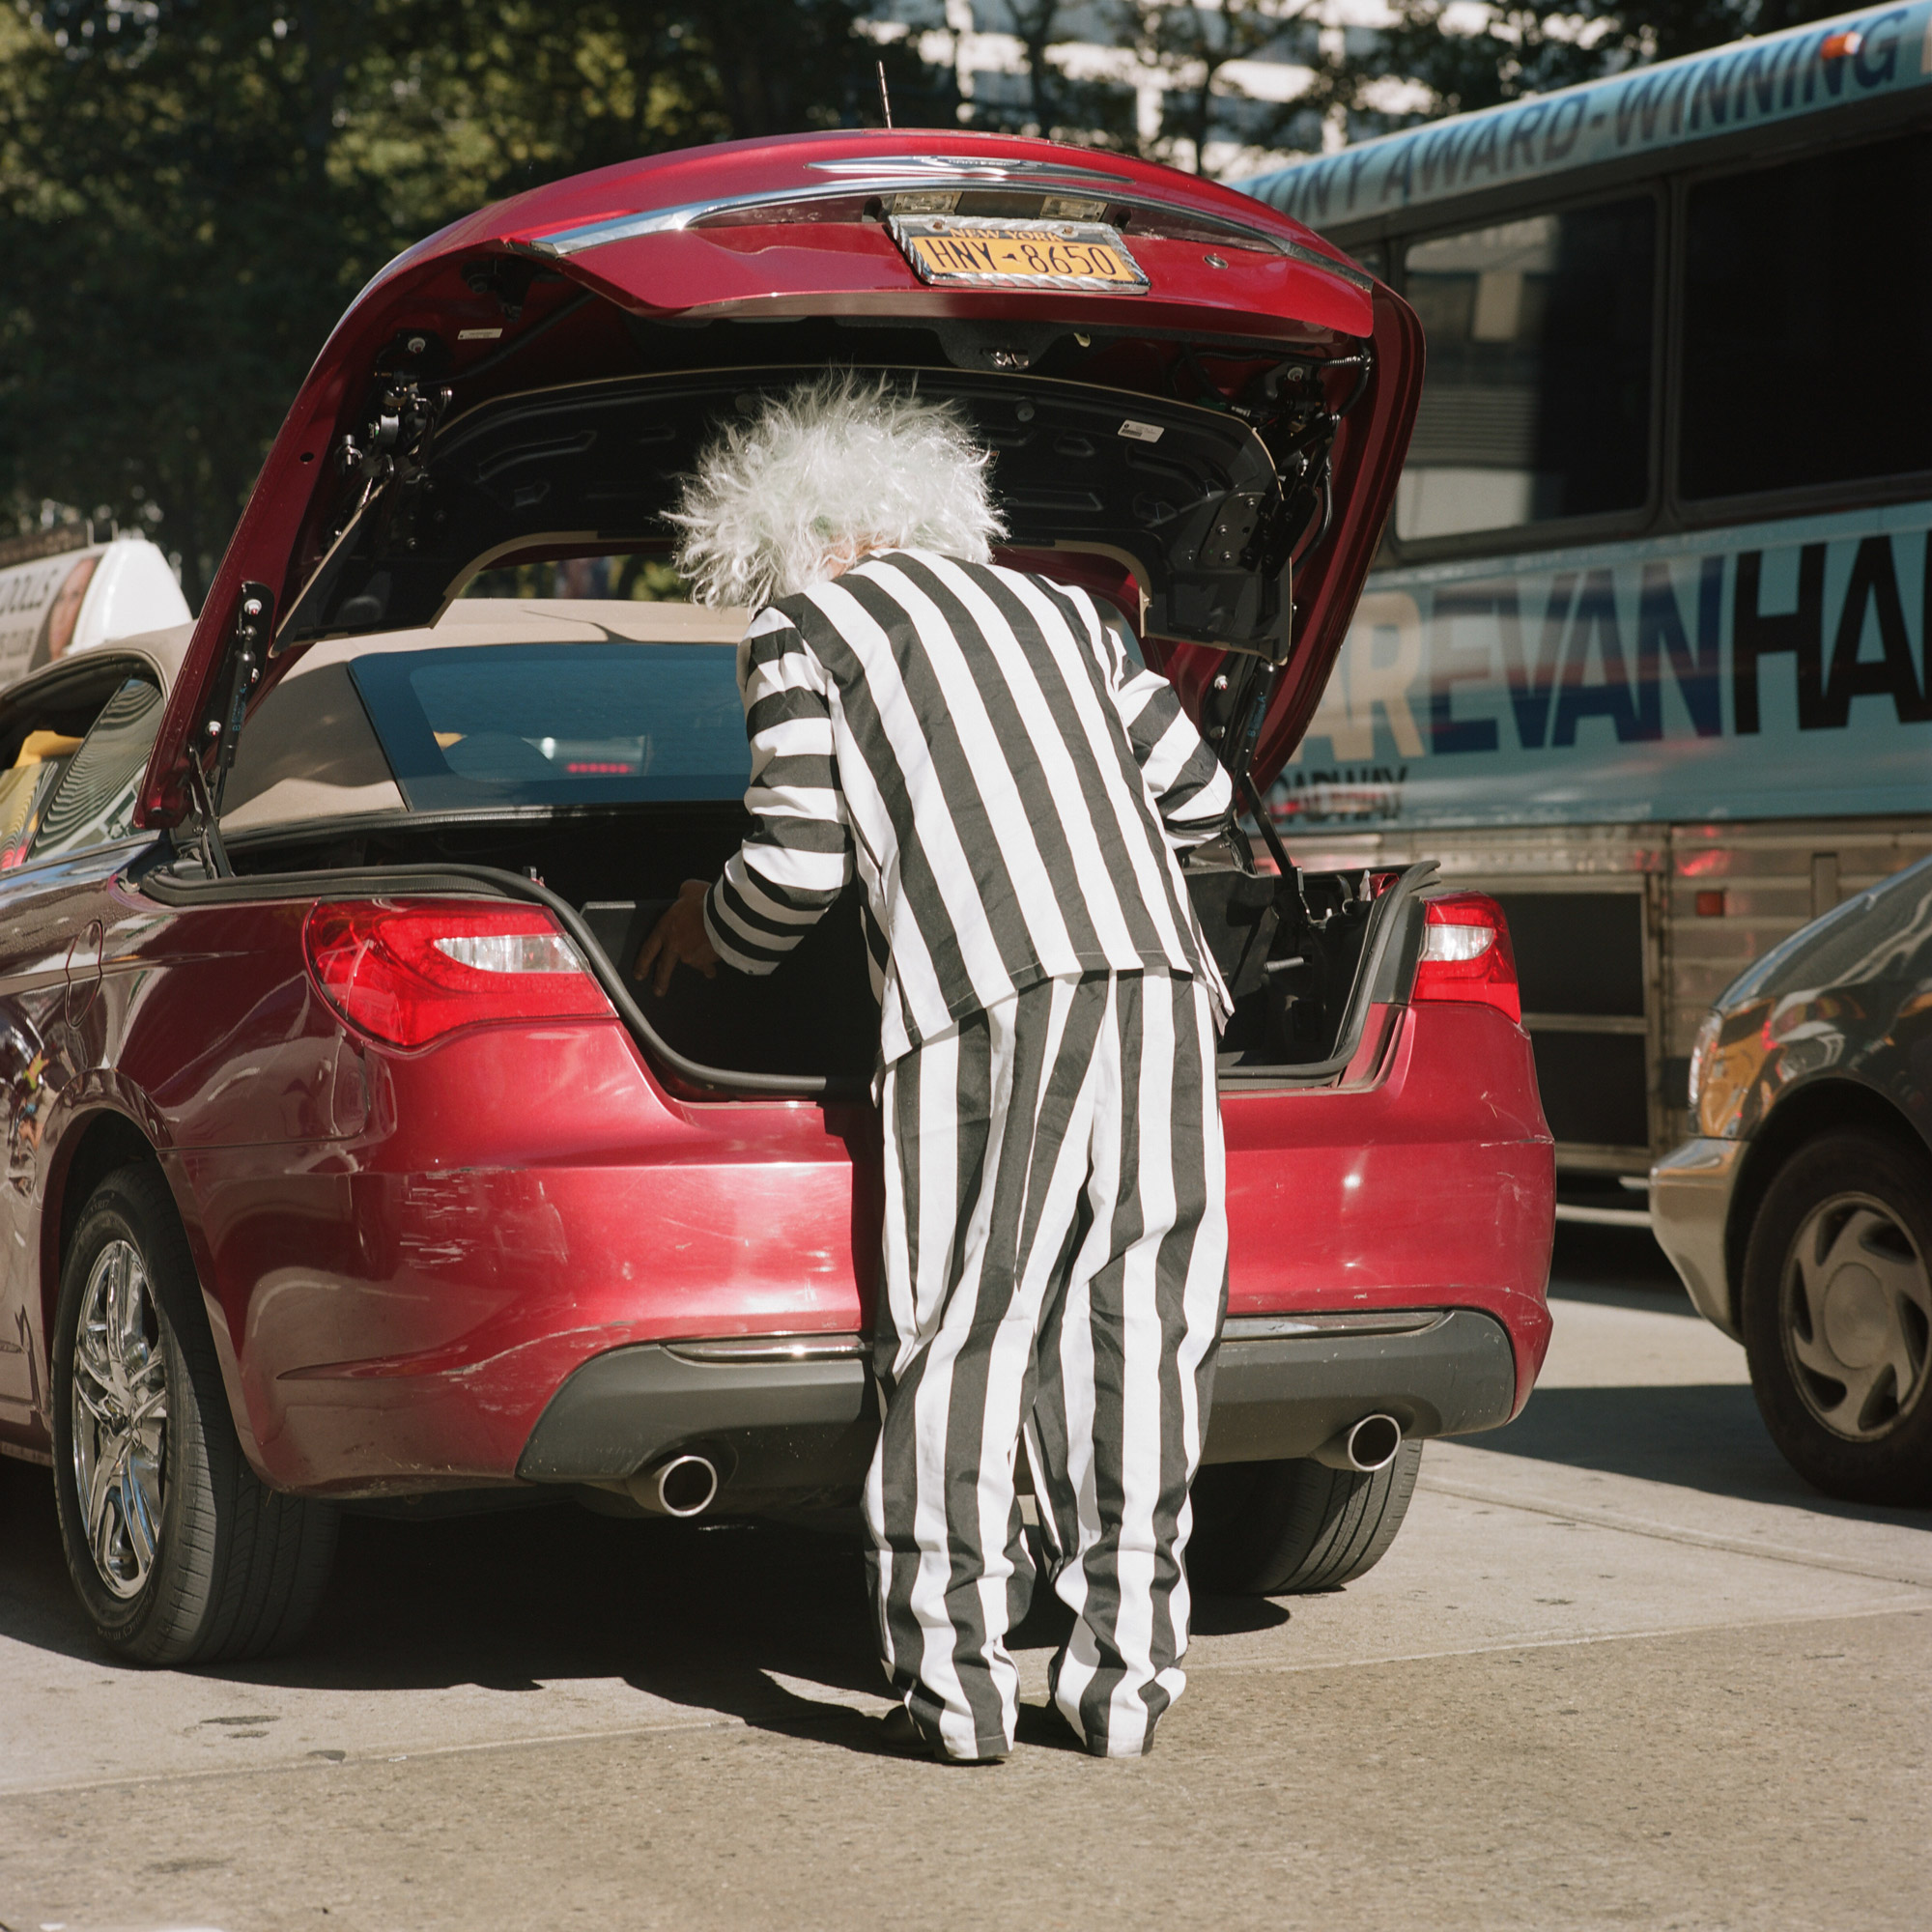 A-MAN-DRESSED-AS-BEETLEJUICE-GRABS-SOMETHING-OUT-OF-HIS-CAR-IN-MANHATTAN-NEW-YORK-